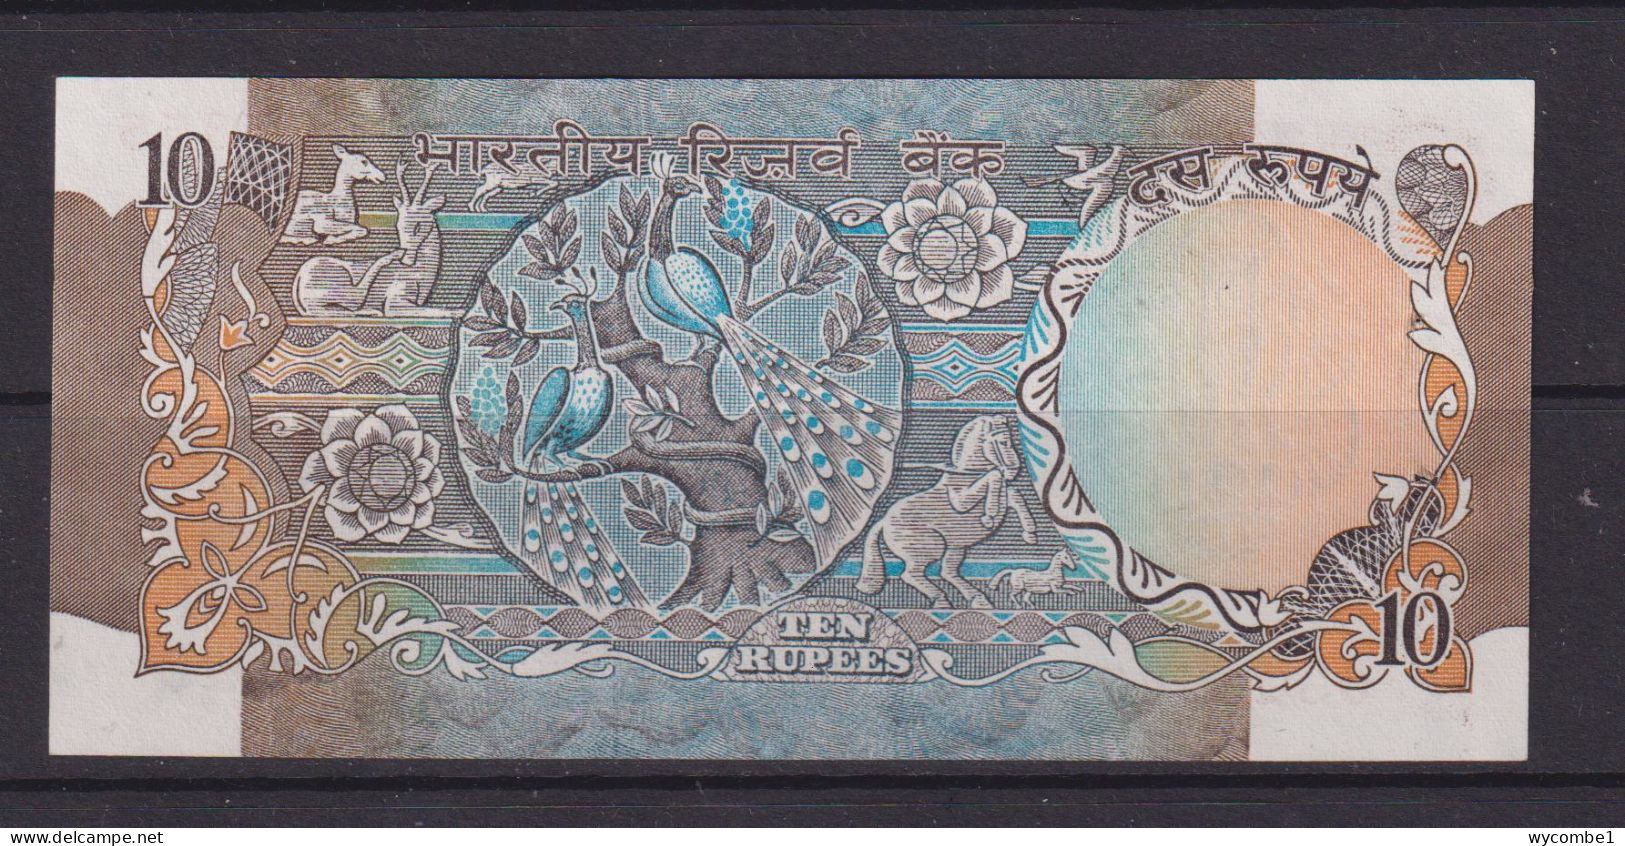 INDIA -  1970-90 10 Rupees UNC/aUNC  Banknote (Pin Holes) - Indien